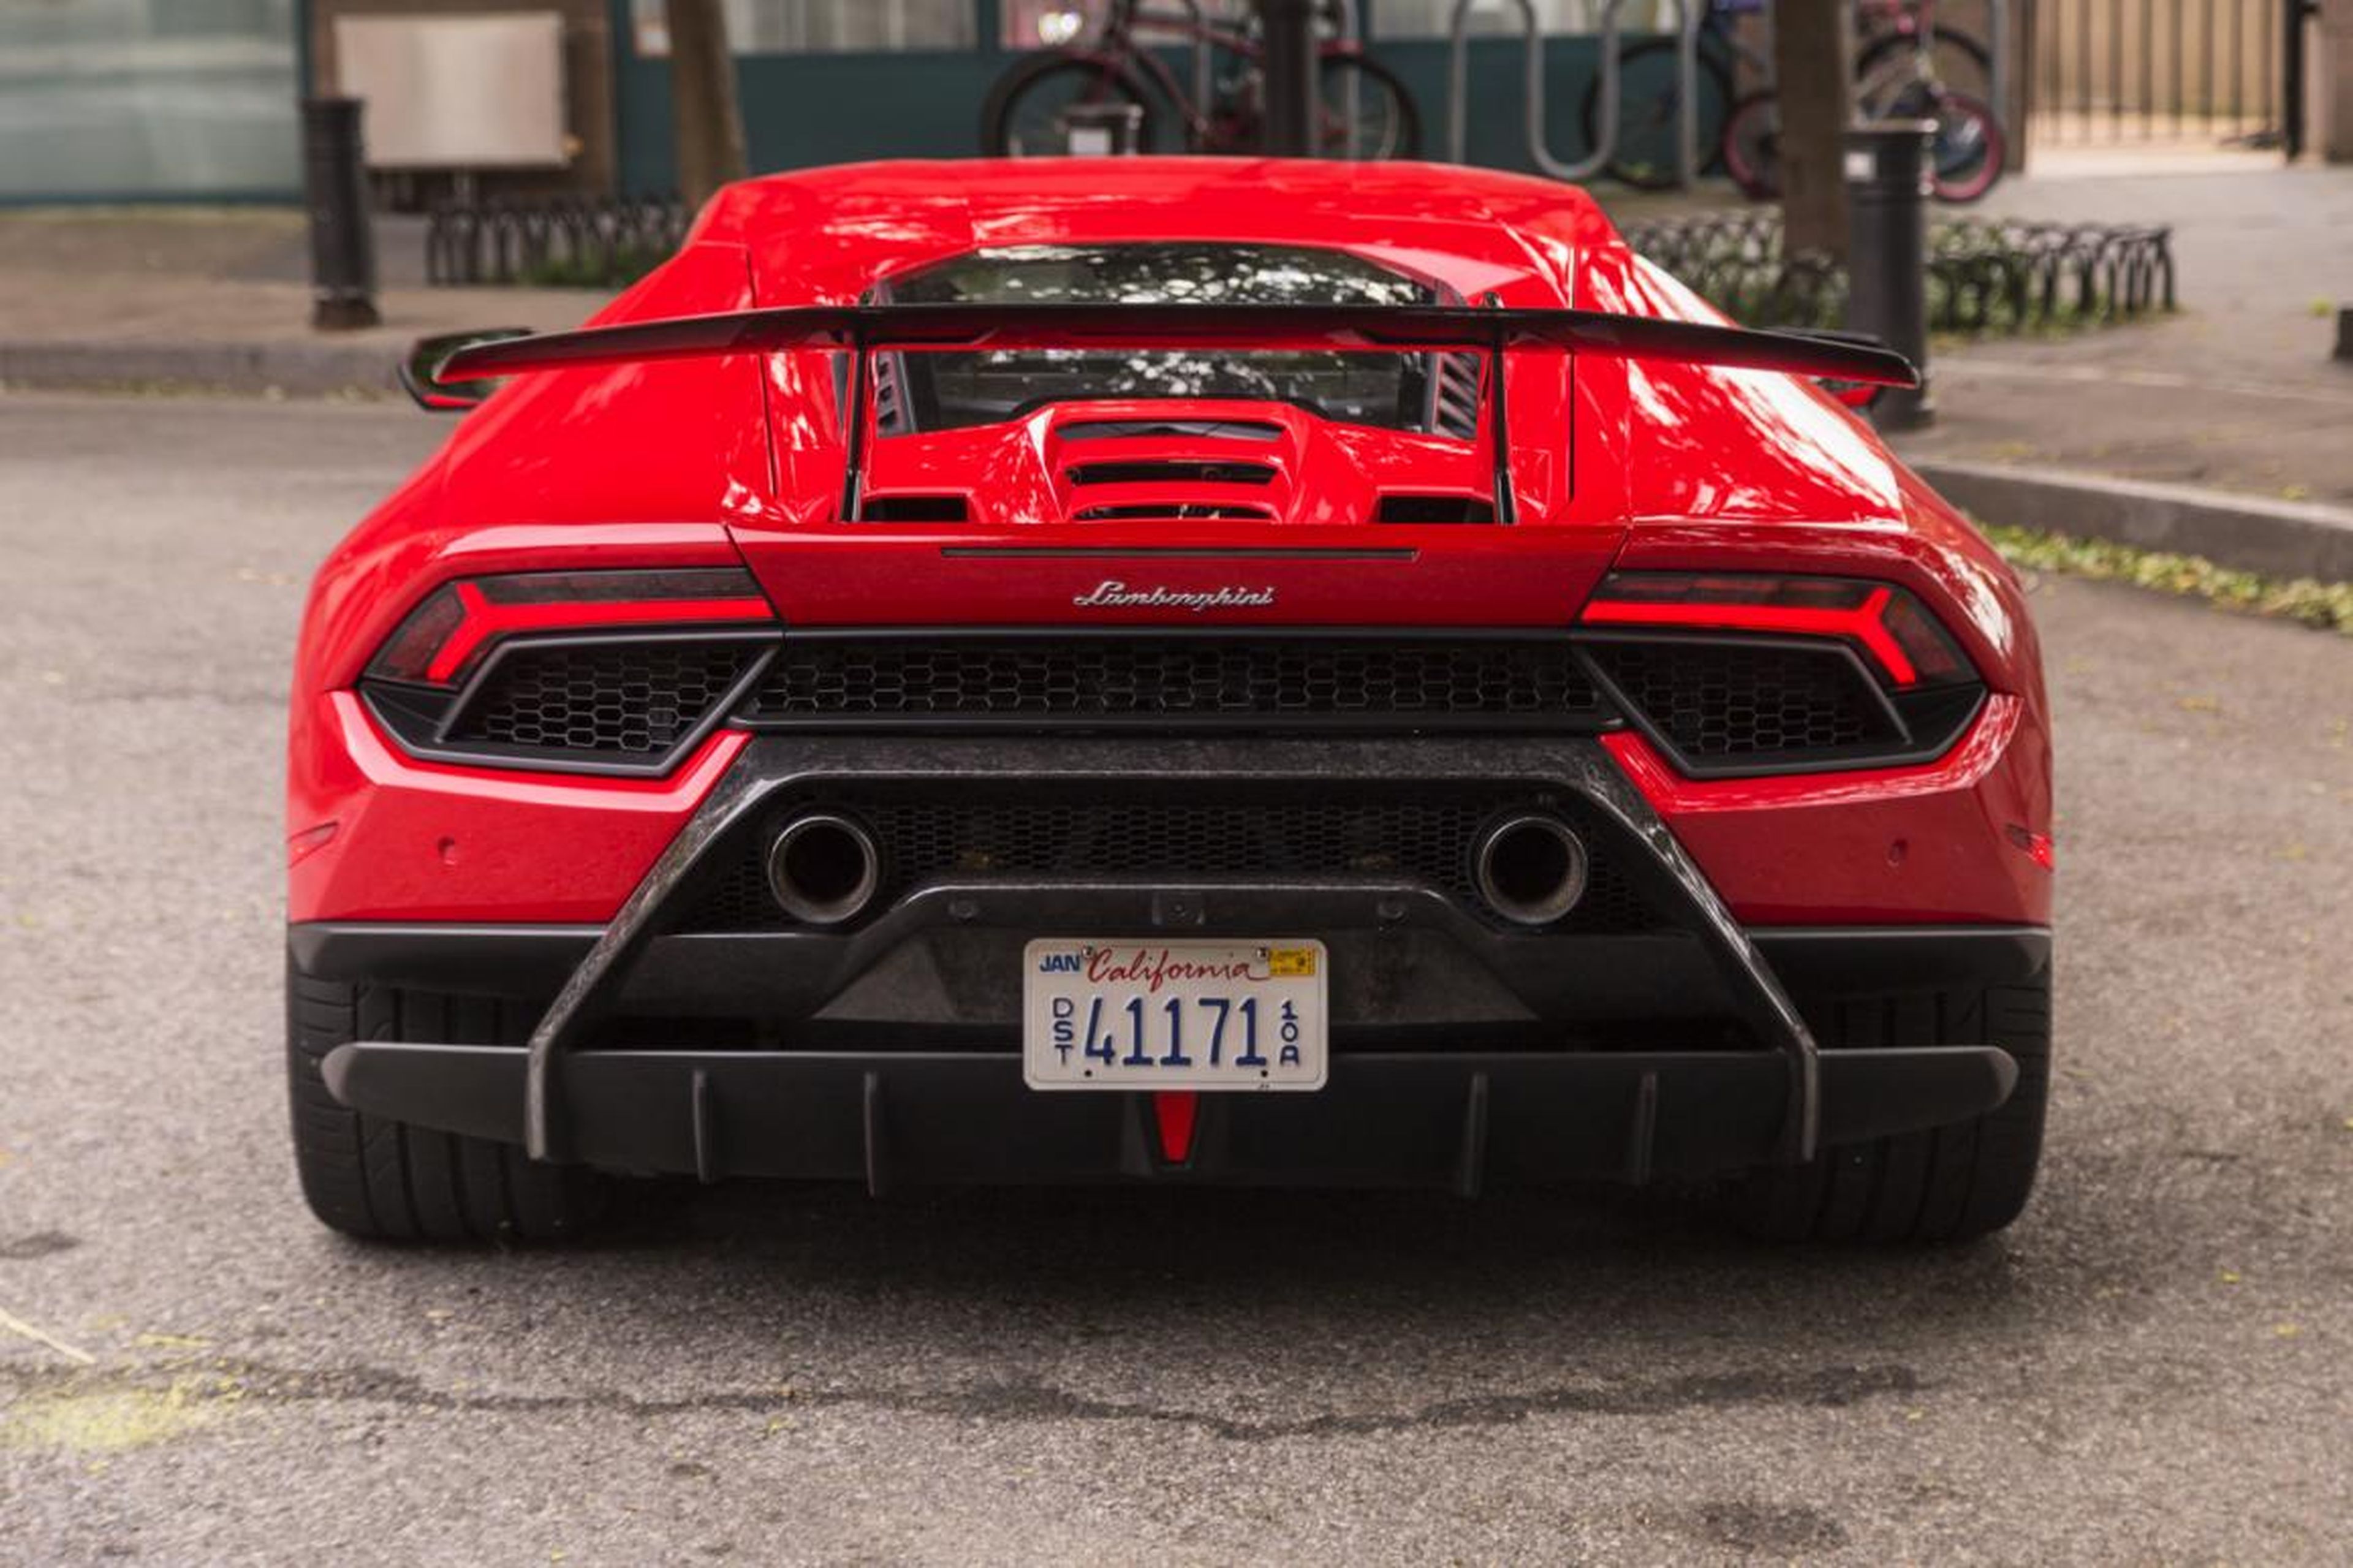 Note the dual exhaust pipes, perched above the Lambo's rear diffuser. They're modest, given that the Huracán Performante is powered by a V10 engine.